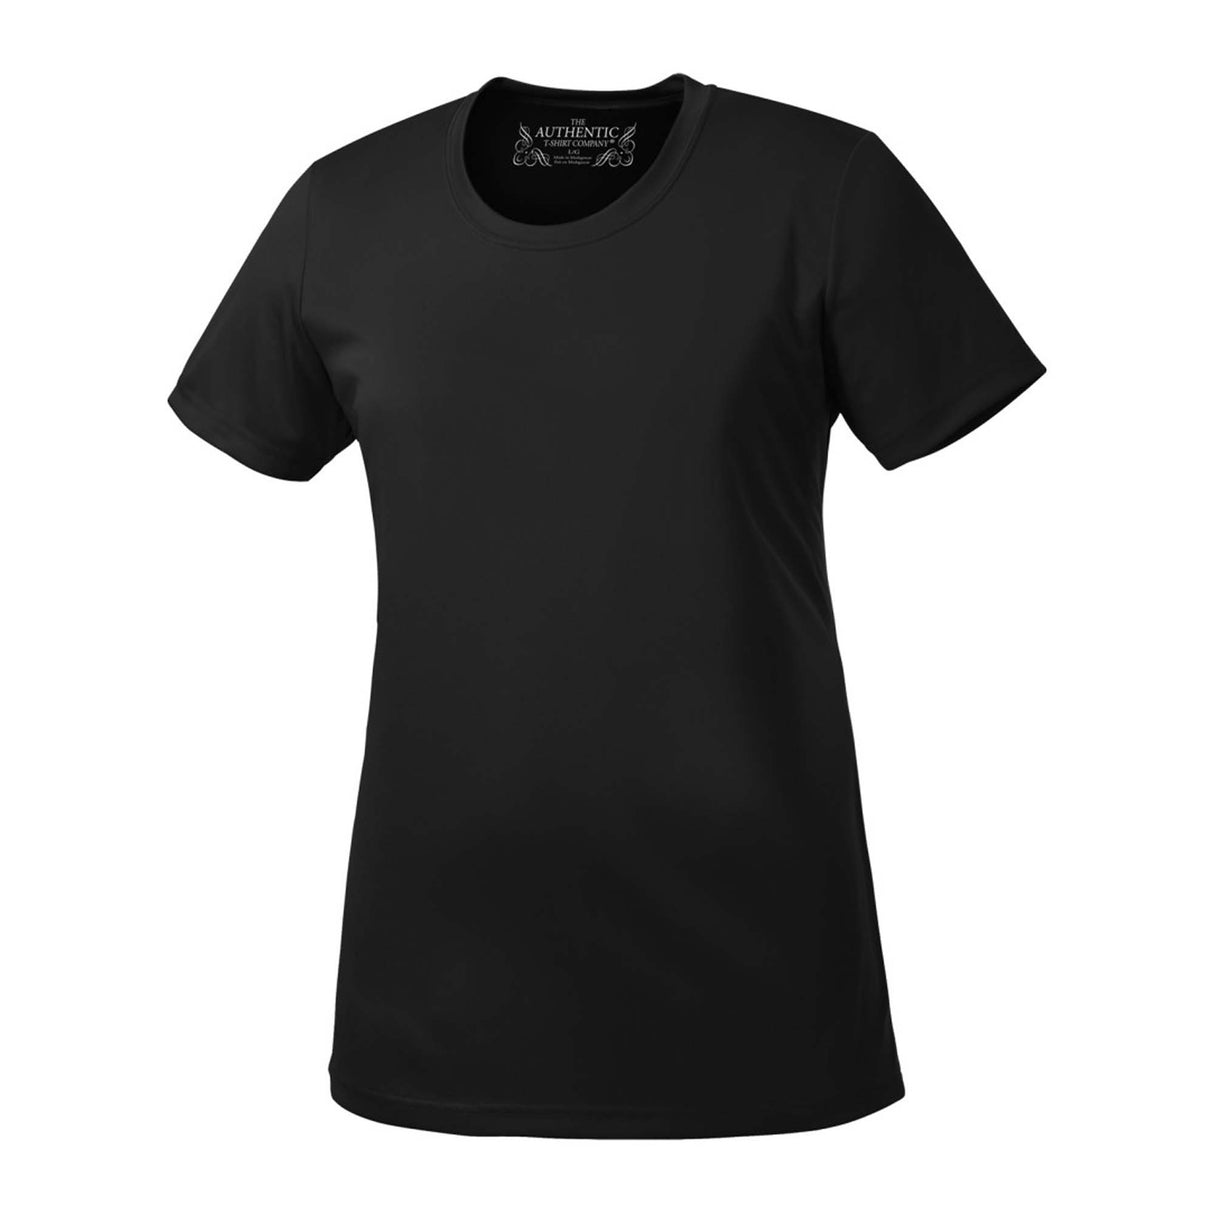 ATC L350 ultimate frisbee jersey for women